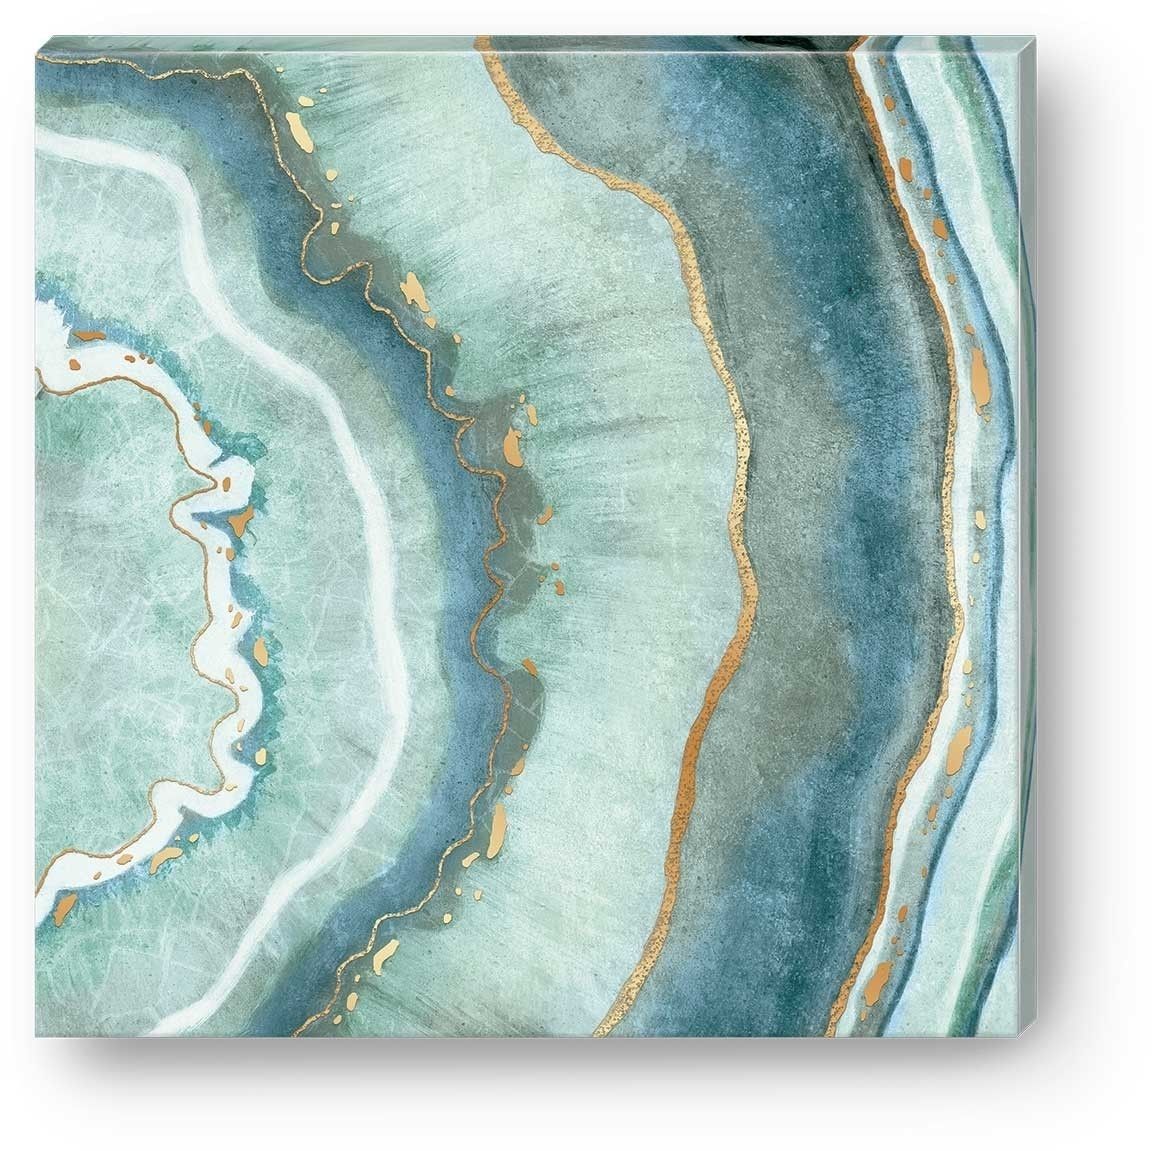 Modest Design Agate Wall Art Majestic Turquoise Agate | Design Ideas In Agate Wall Art (Photo 1 of 20)